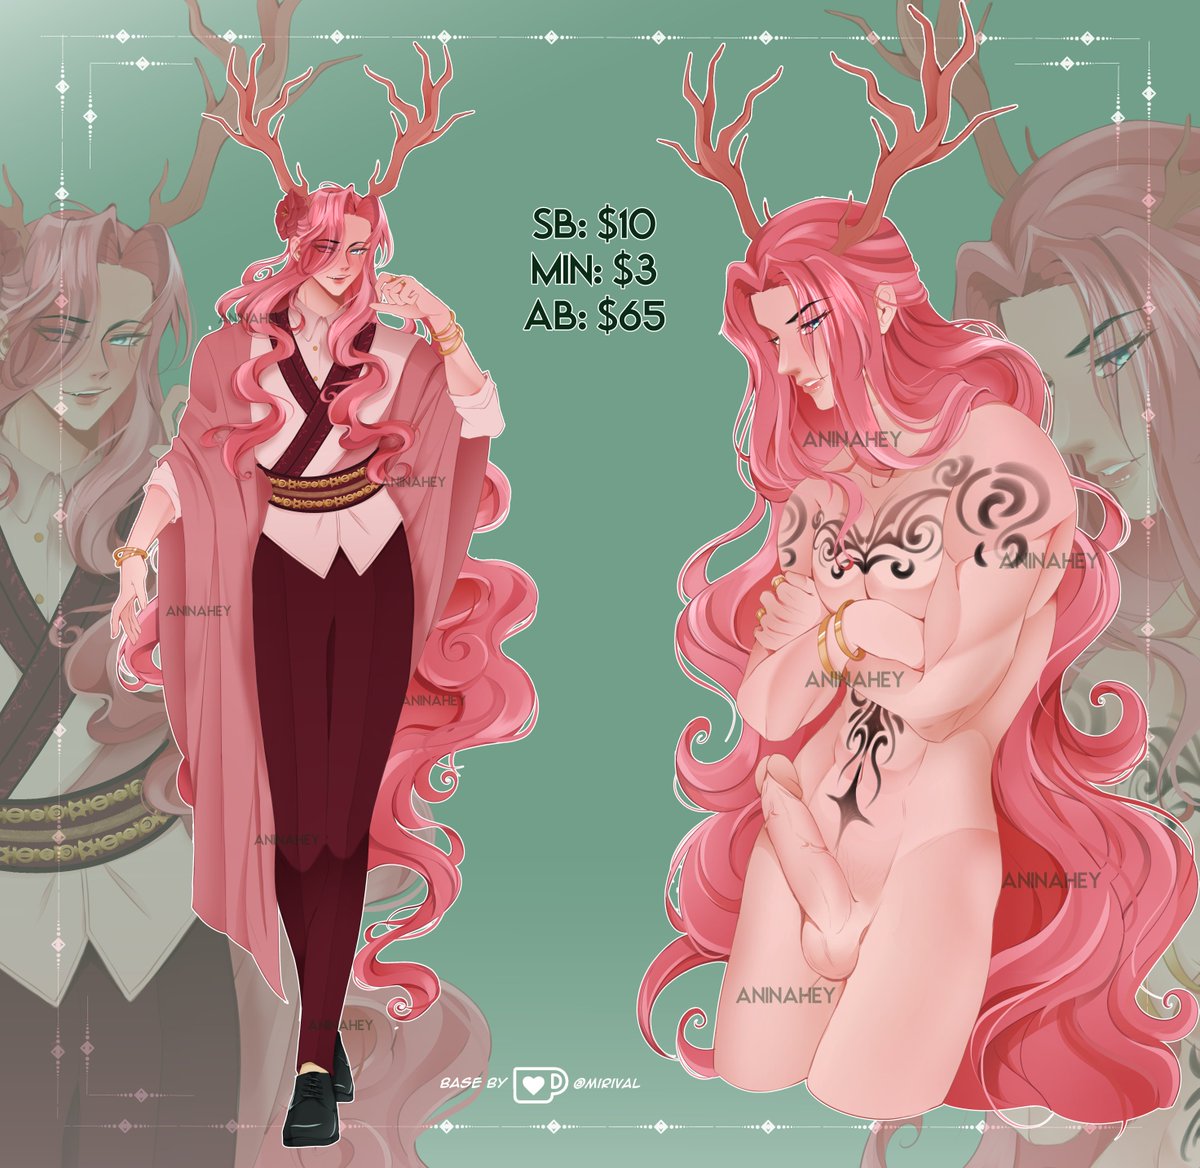 Pinky Pinky Boooyy 💓
But not that pinky 👀

Base by Mirival ko-fi.com/s/524f18a470
Art by me (Aninahey)

#art #arte #artmoots #adopt #openadopt #adoptauction #openauction #adoptablesale #pinkadopt #pinkboy #hotboy #animeboy